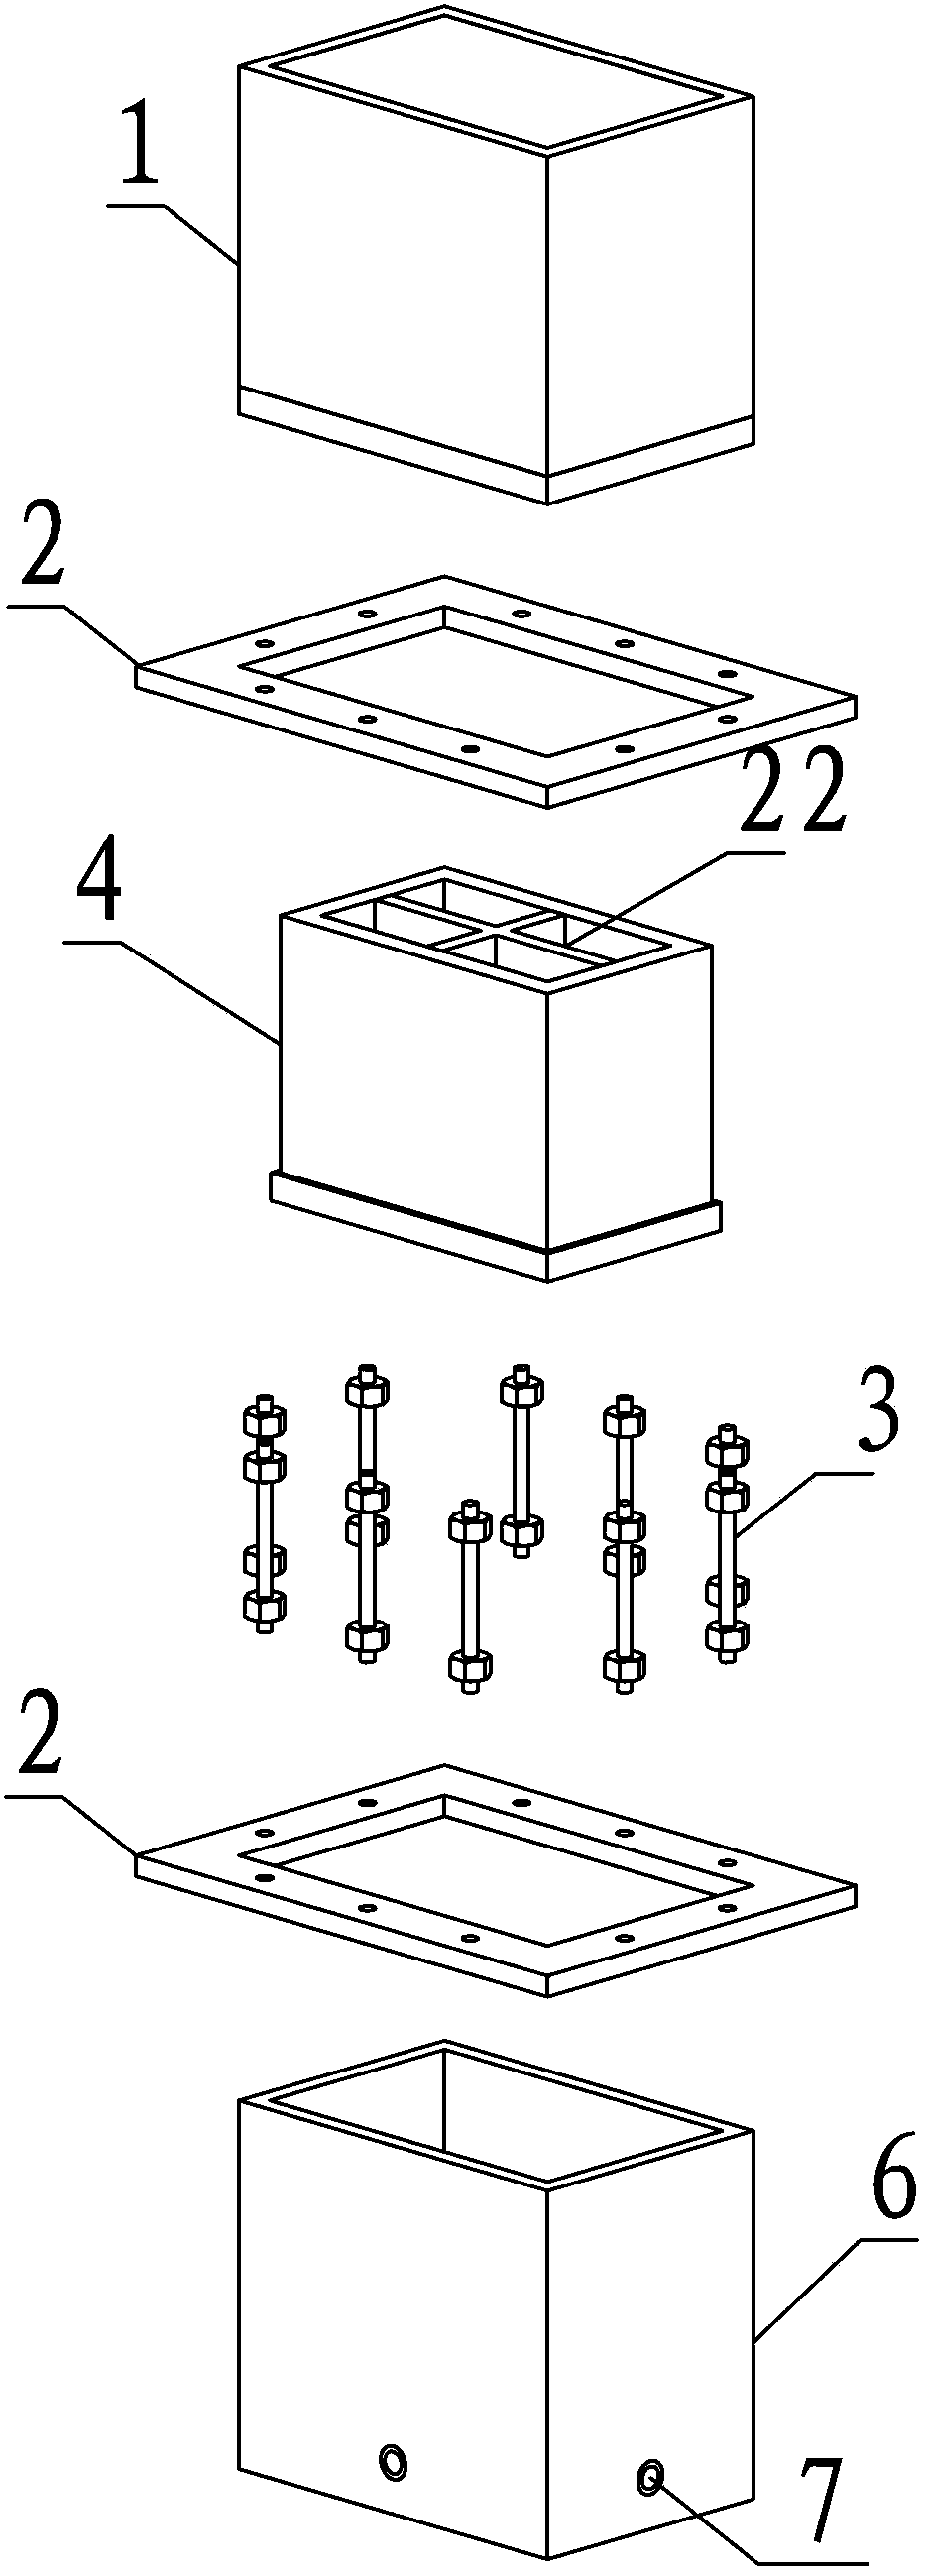 Method and equipment for sequentially constructing ultra-long hanging posts